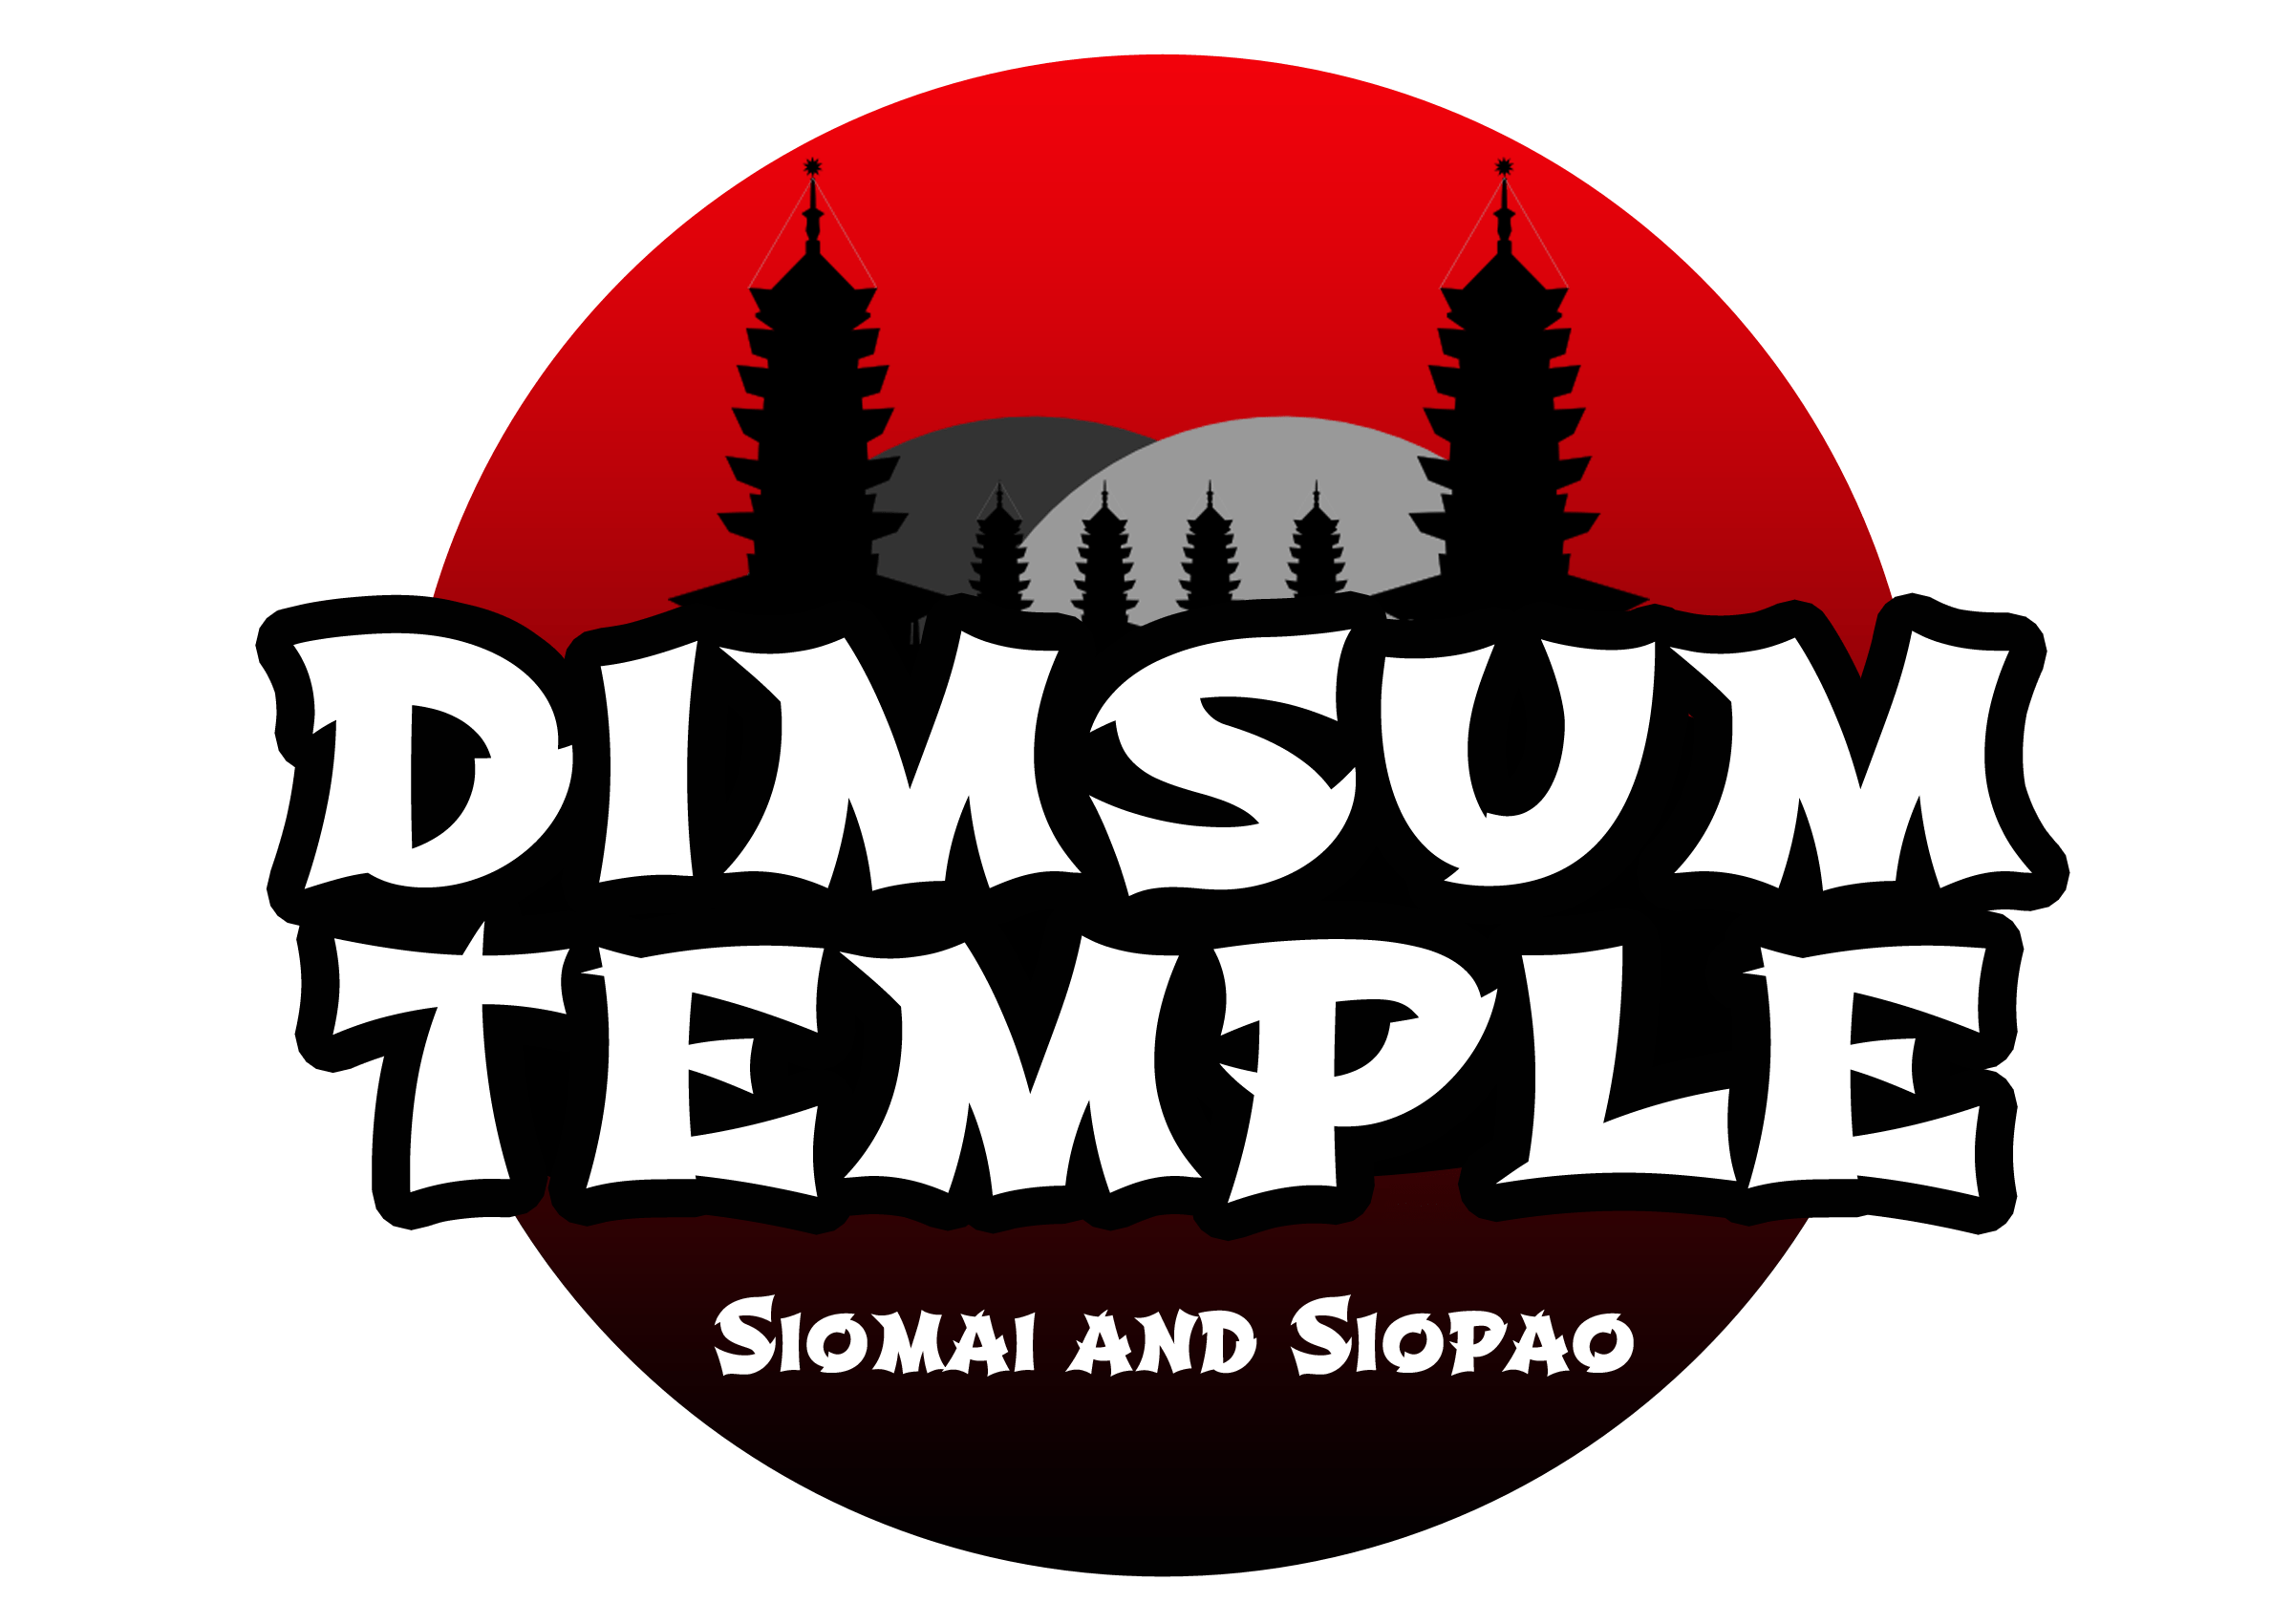 Dimsum Temple Food Cart Franchise P79,000 ALL IN Complete Package Ready to Operate No Royalty Fee No Renewal Fee No Hidden Charges 0918-8073575/0915-2828213